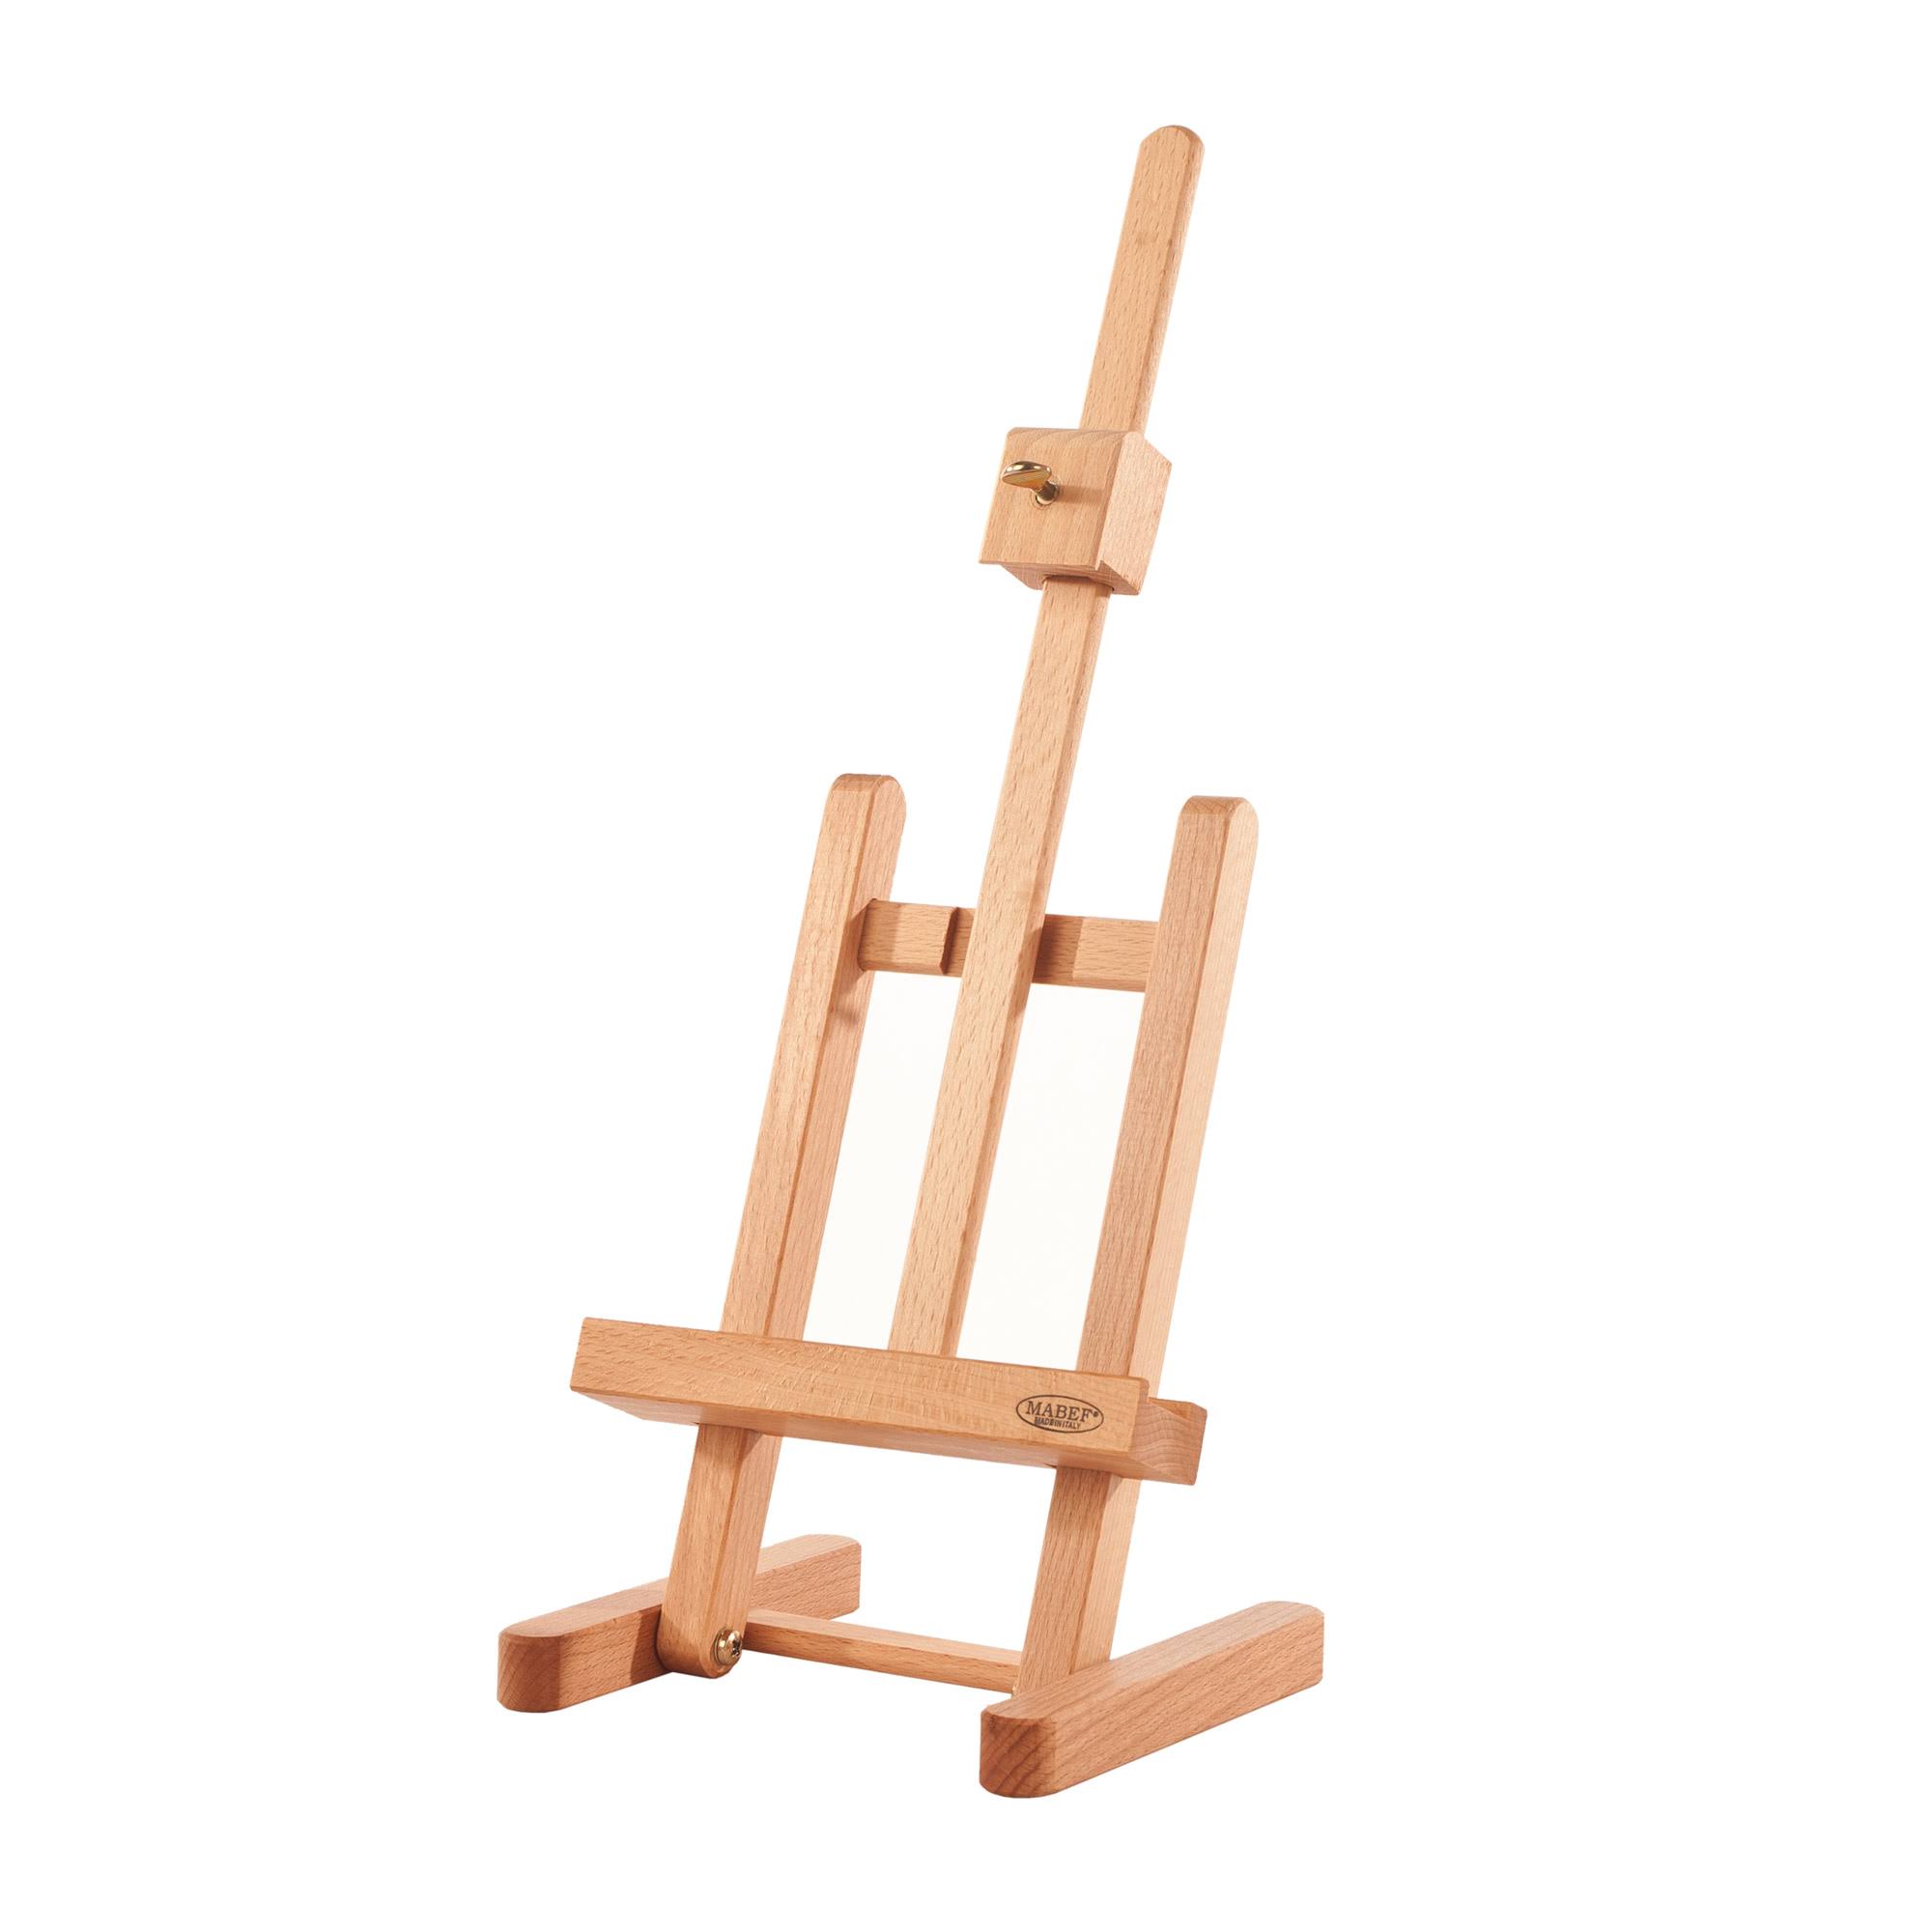 Mabef - Table easel M16